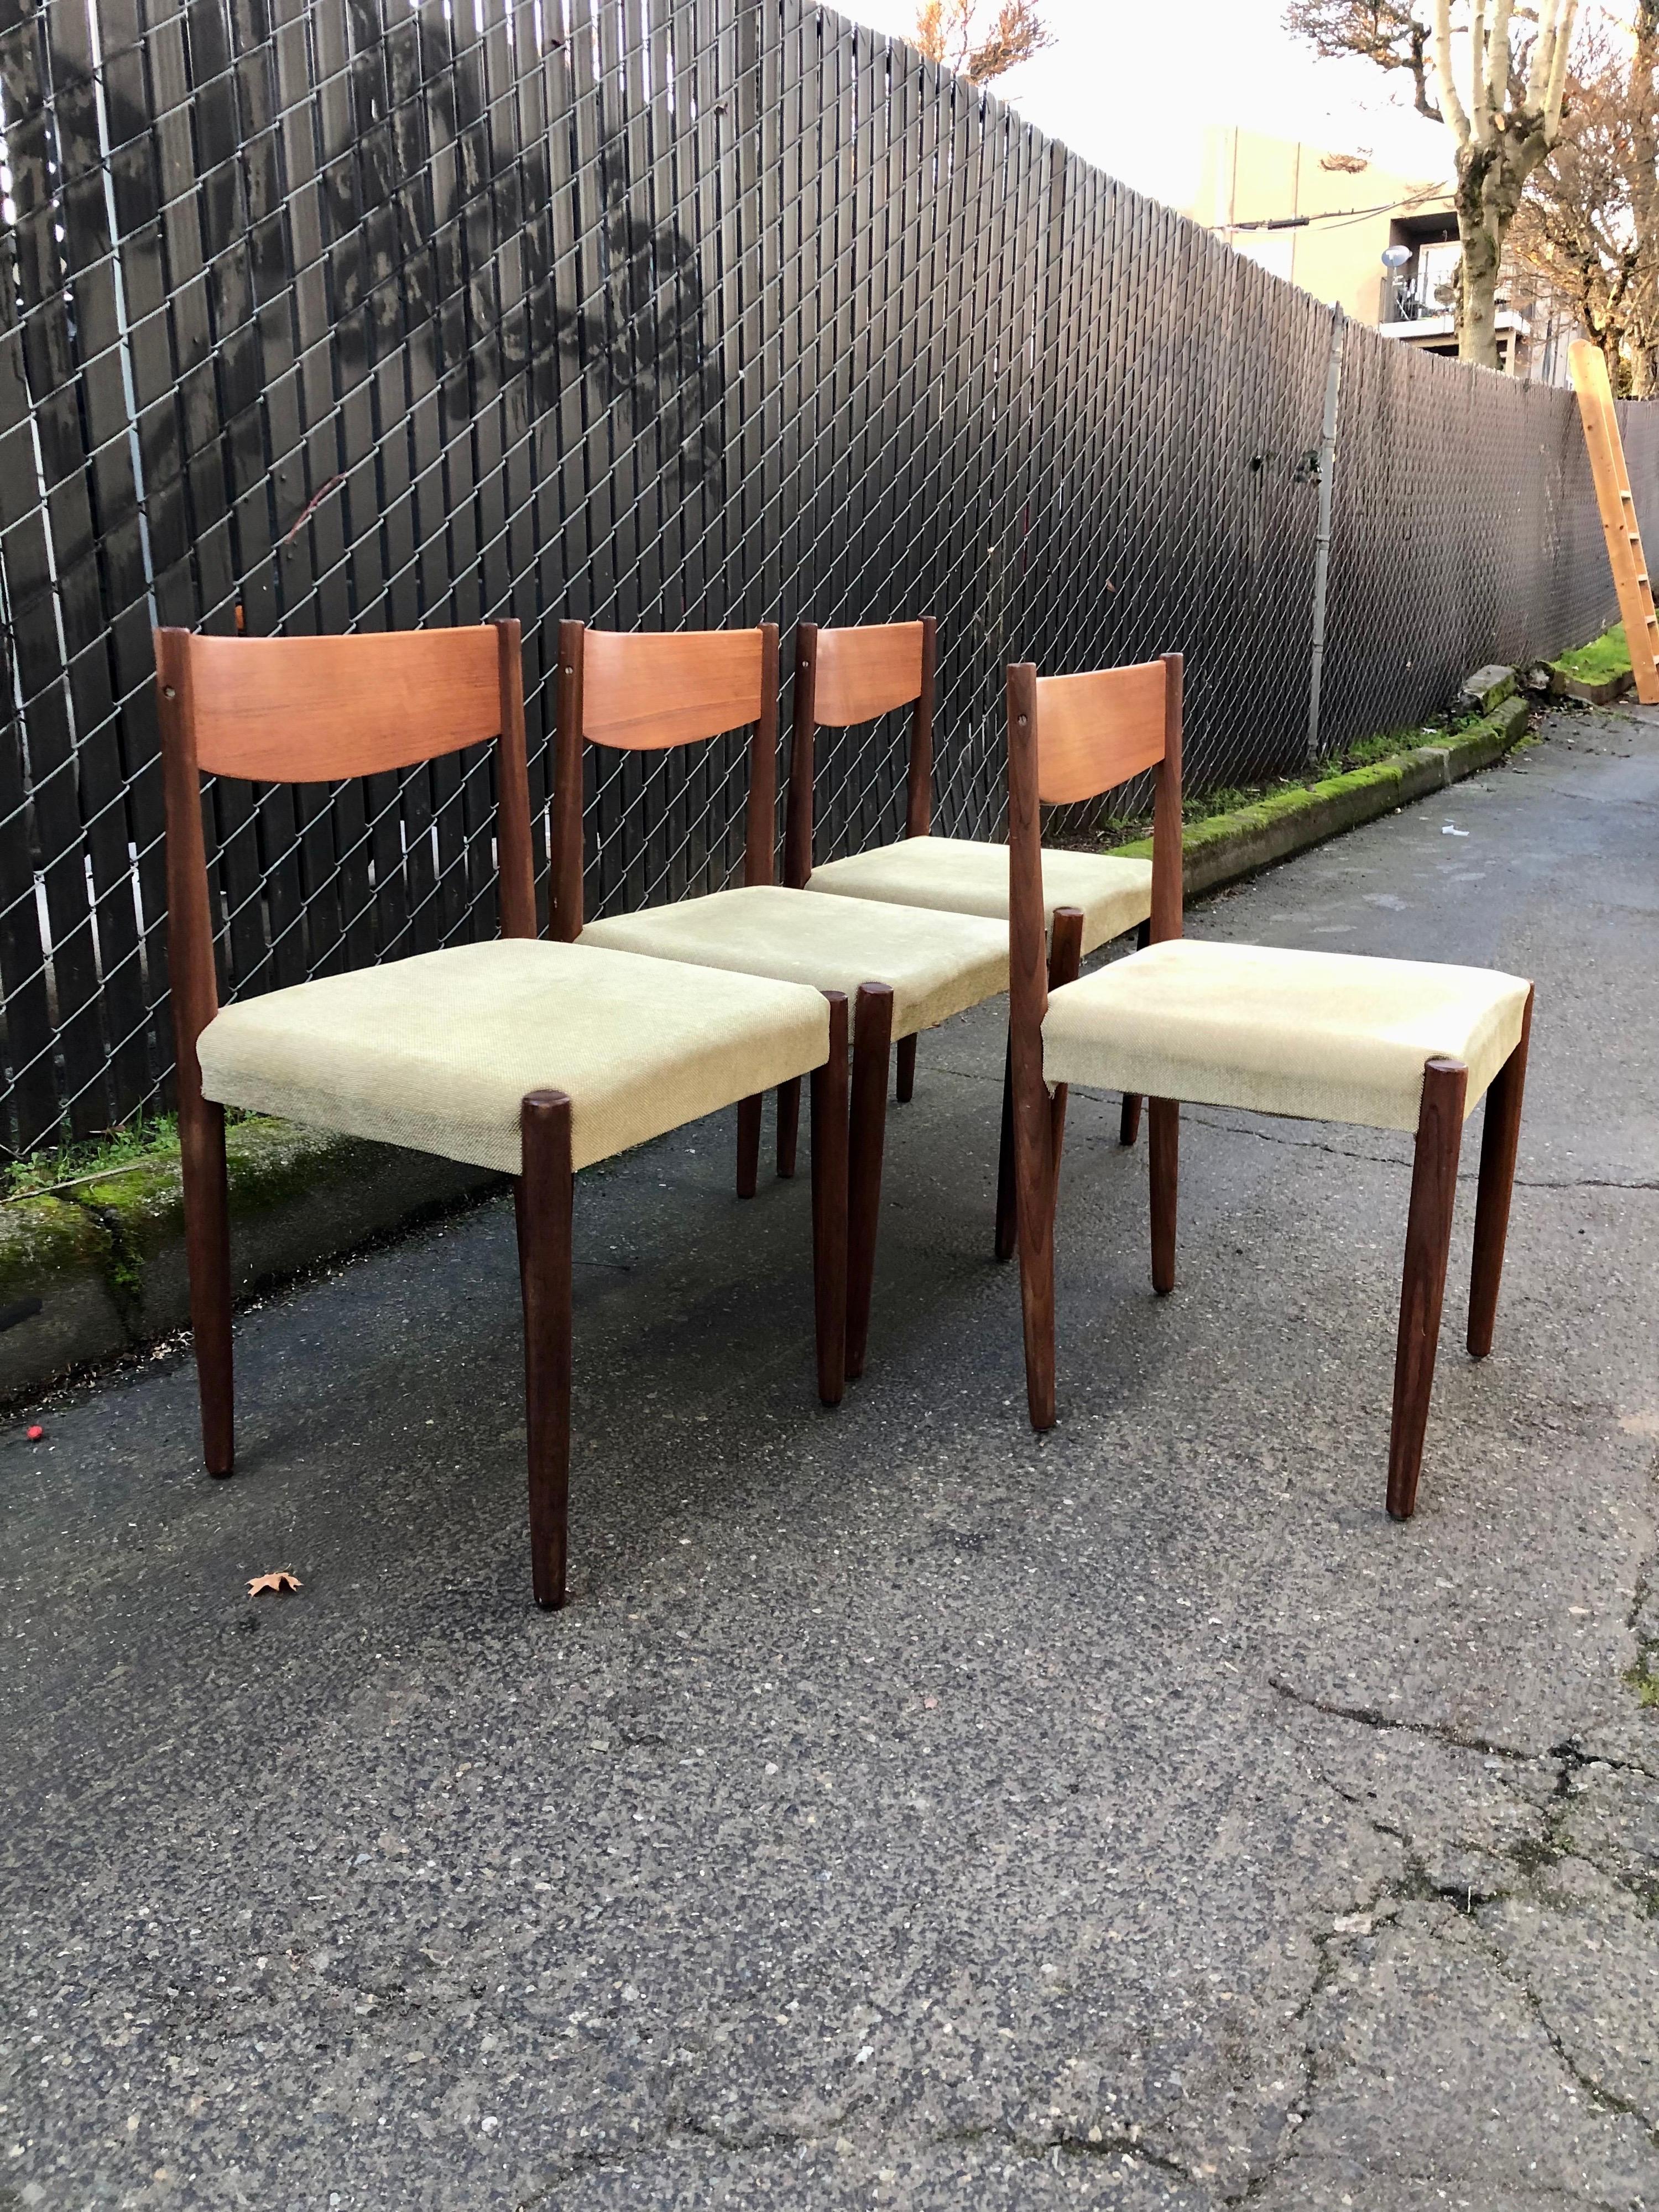 Mid-20th Century Vintage Danish Modern Teak Dining Chair Set by Poul Volther For Sale